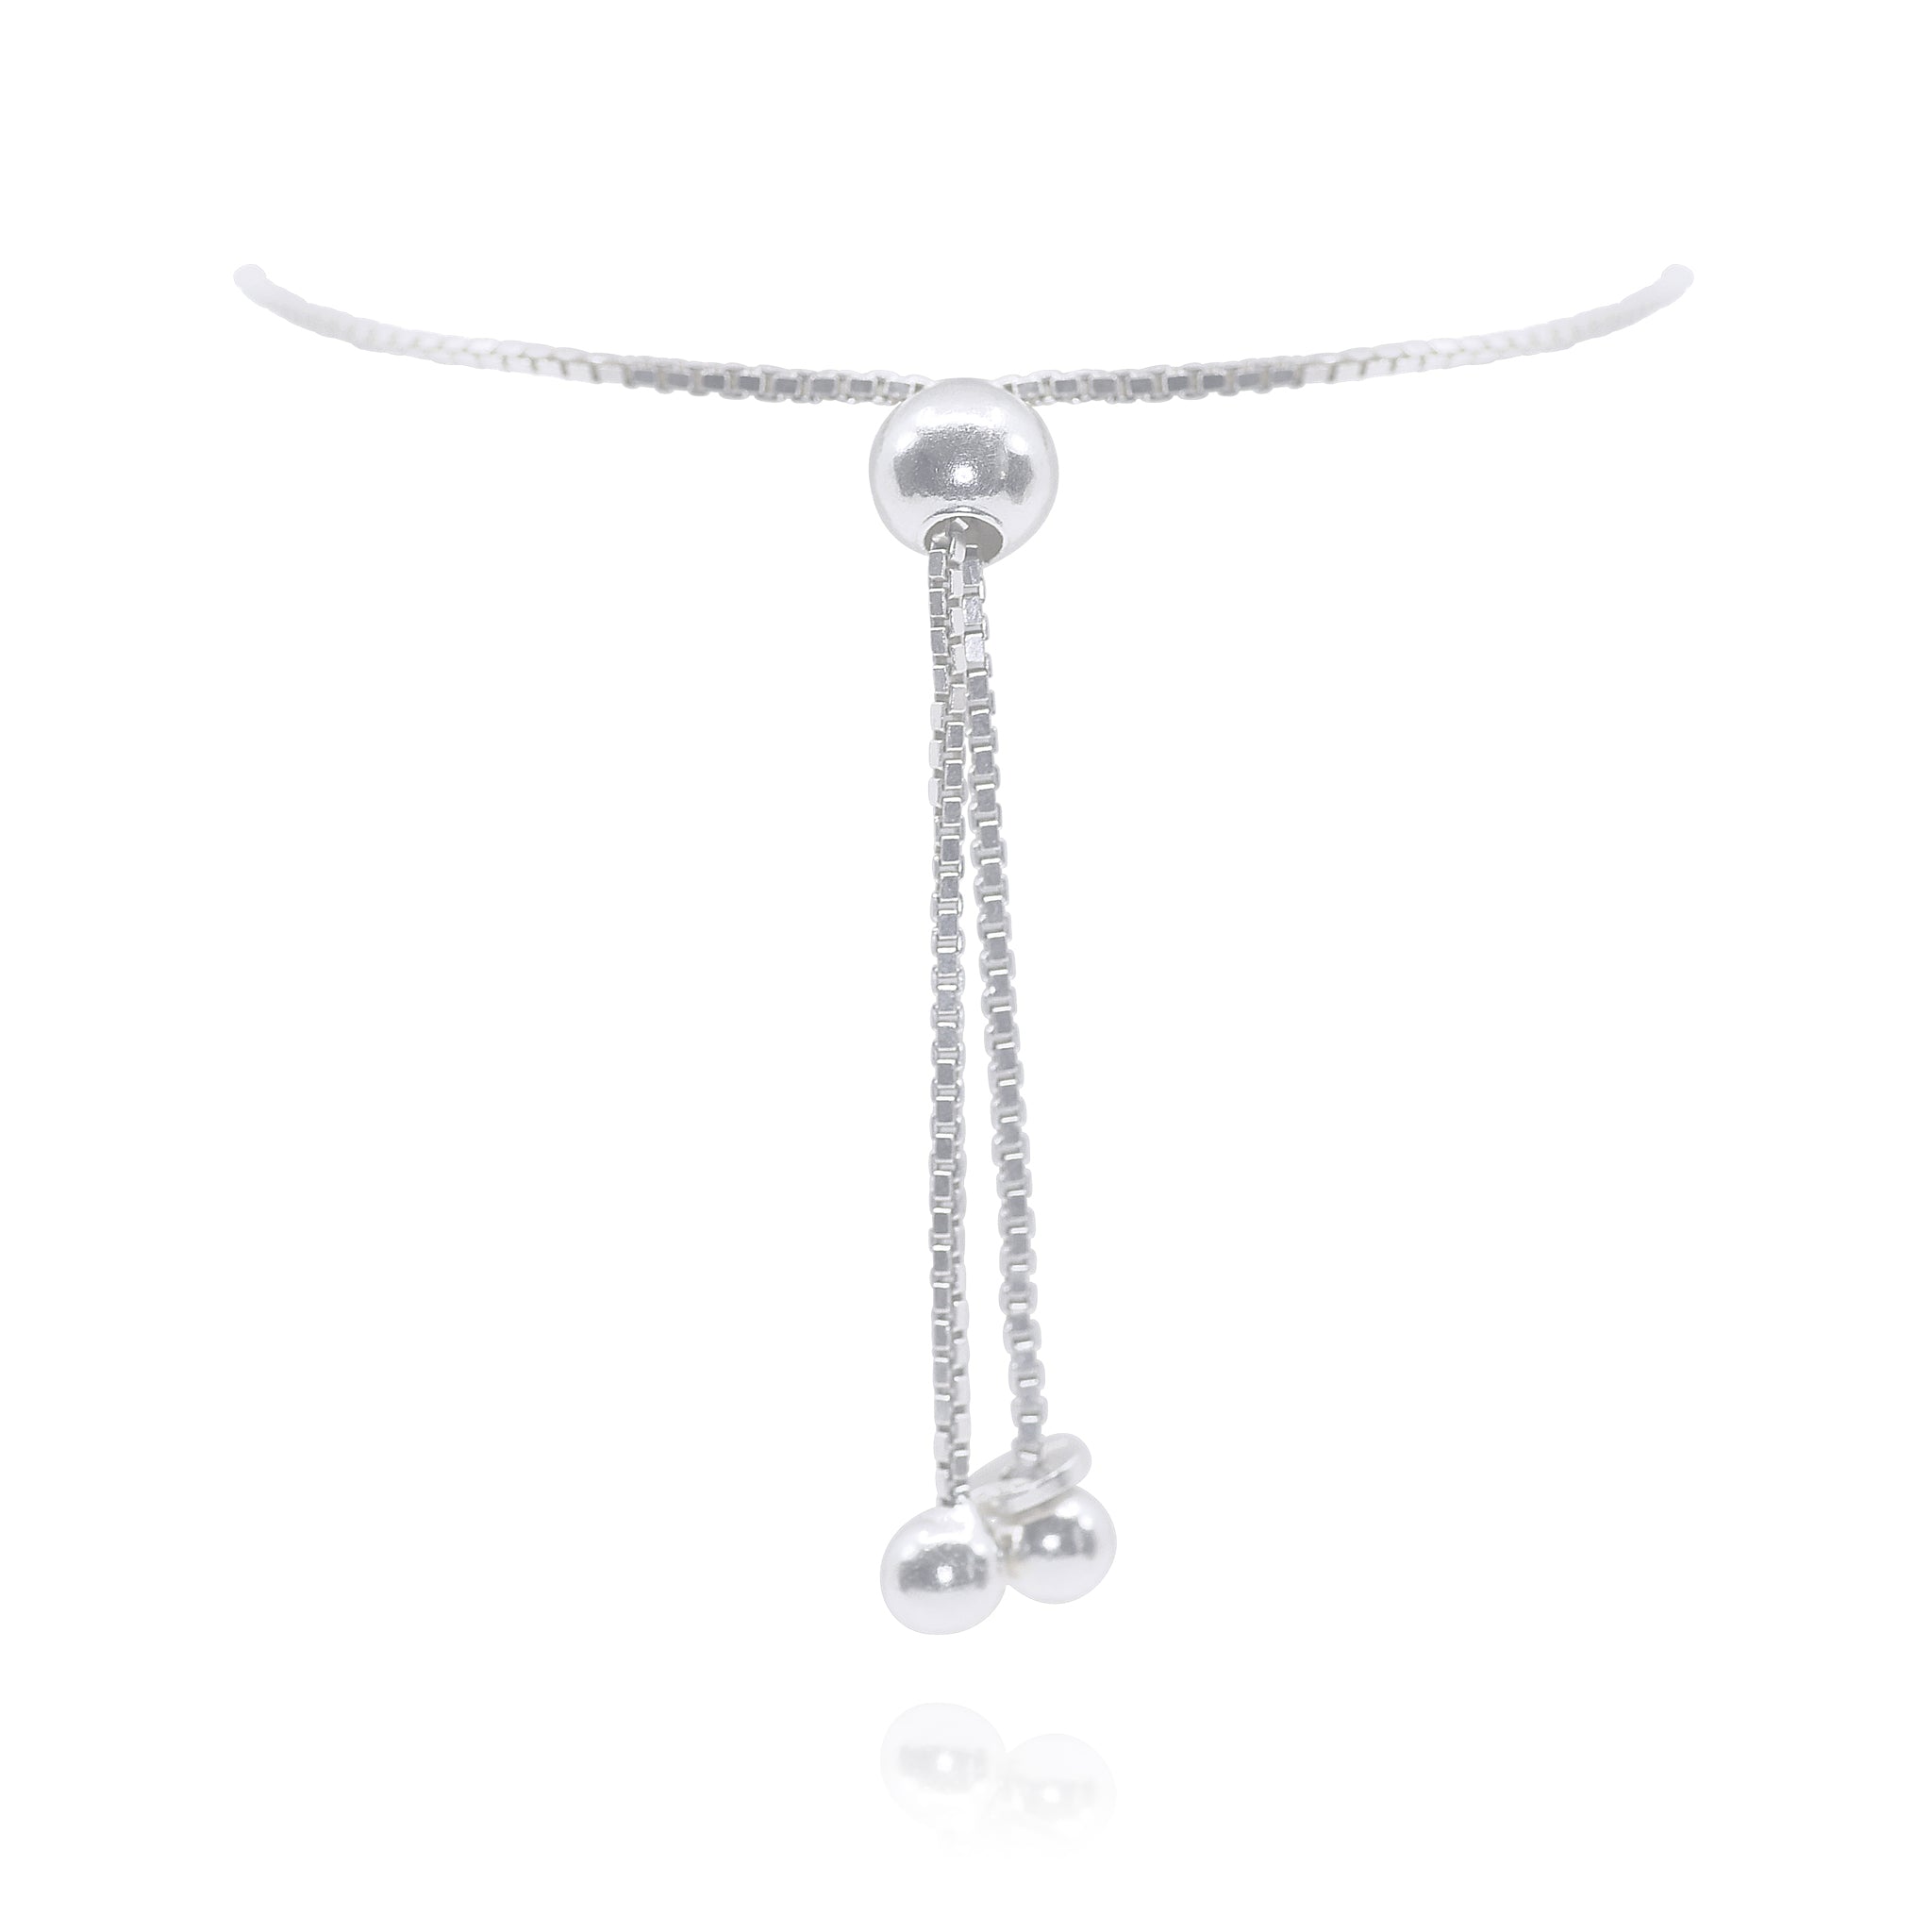 Sterling Silver Ball Chain Bracelet Sterling Silver / Small